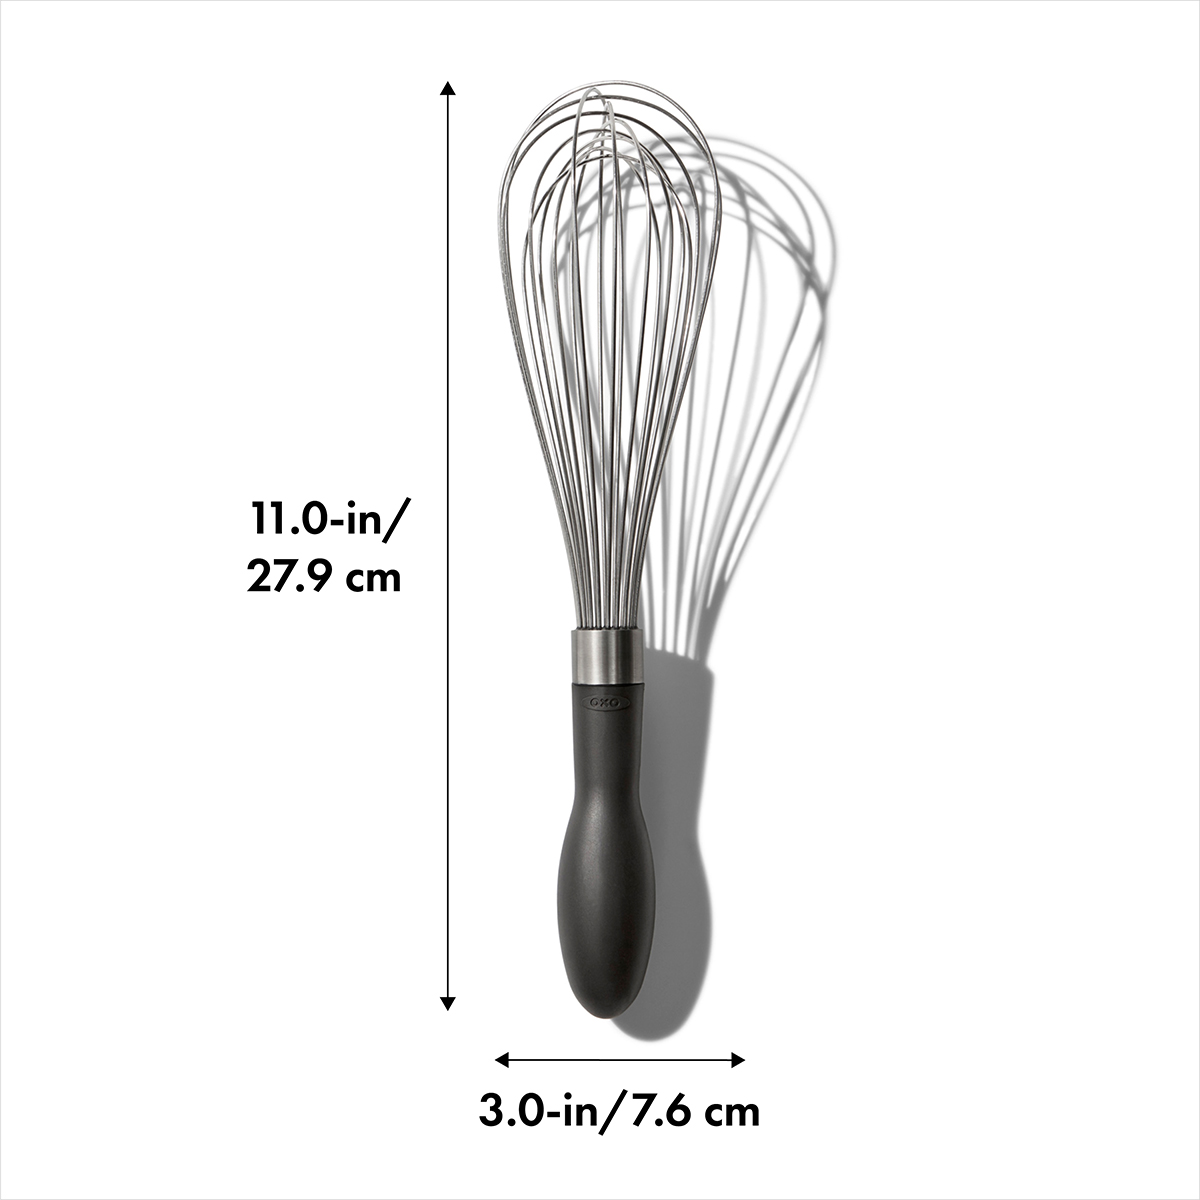 https://www.containerstore.com/catalogimages/490674/10095509-oxo-gg_74291_8dim-balloon-w.jpg